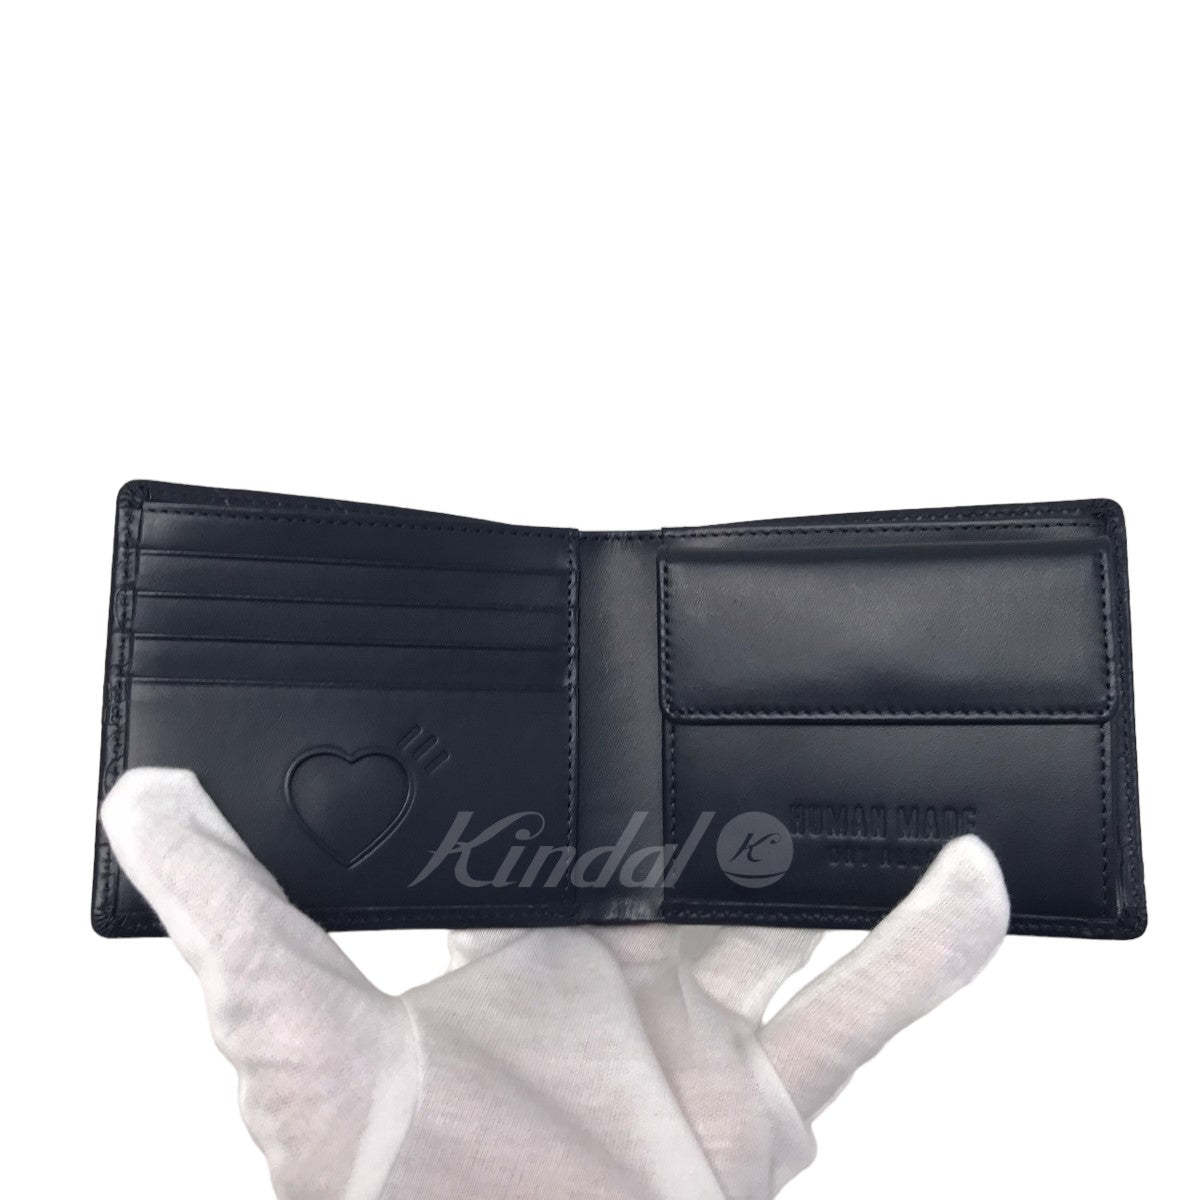 HUMAN MADE(ヒューマンメイド) 23AW「LEATHER WALLET」レザー 